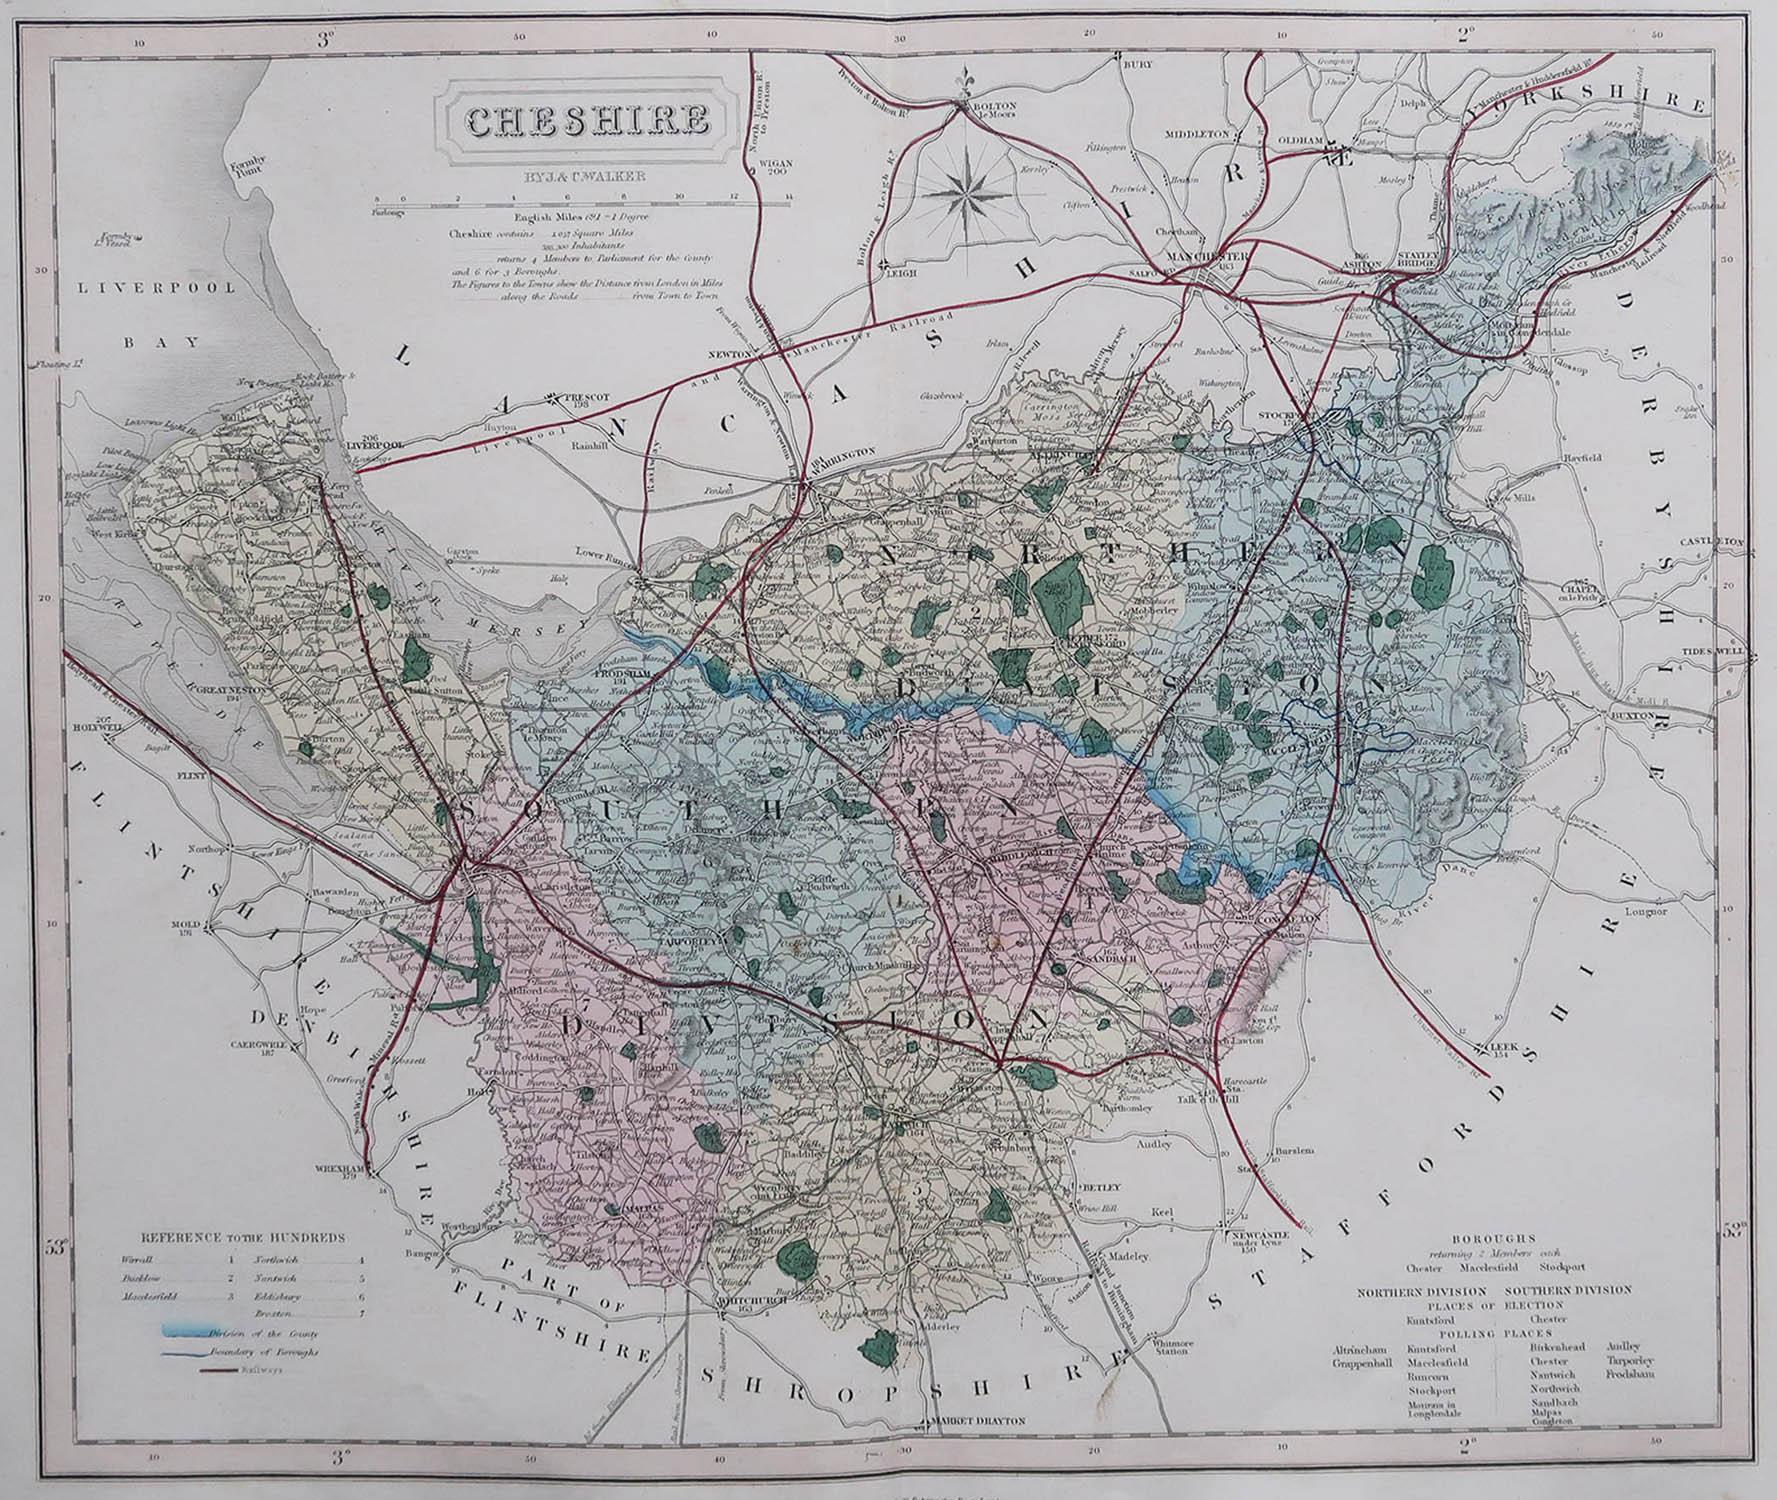 Great map of Cheshire

Original colour

By J & C Walker

Published by Longman, Rees, Orme, Brown & Co. 1851

Unframed.




